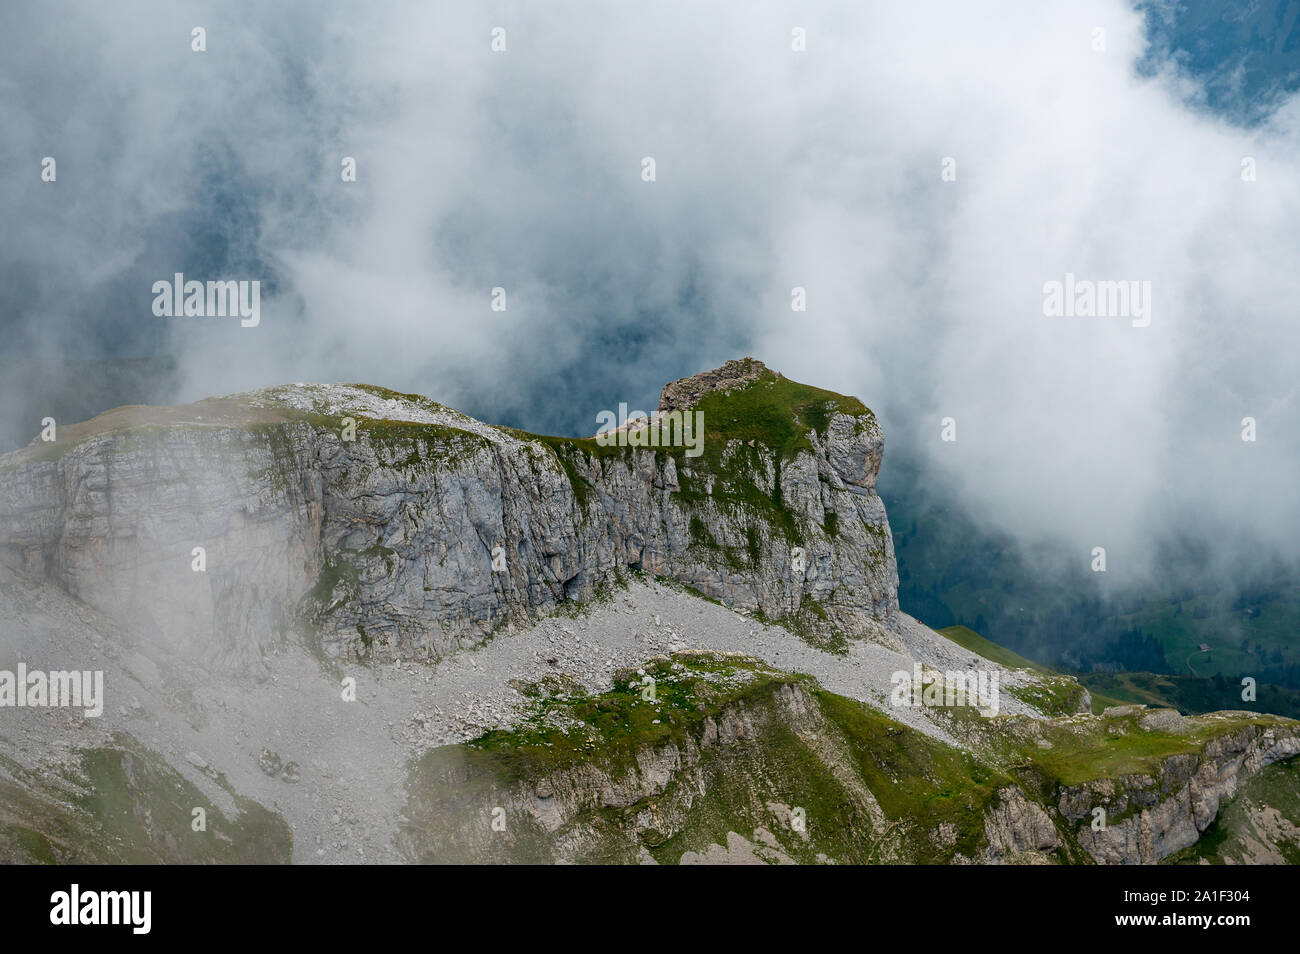 landscape of Kiental in misty clouds while hiking Stock Photo